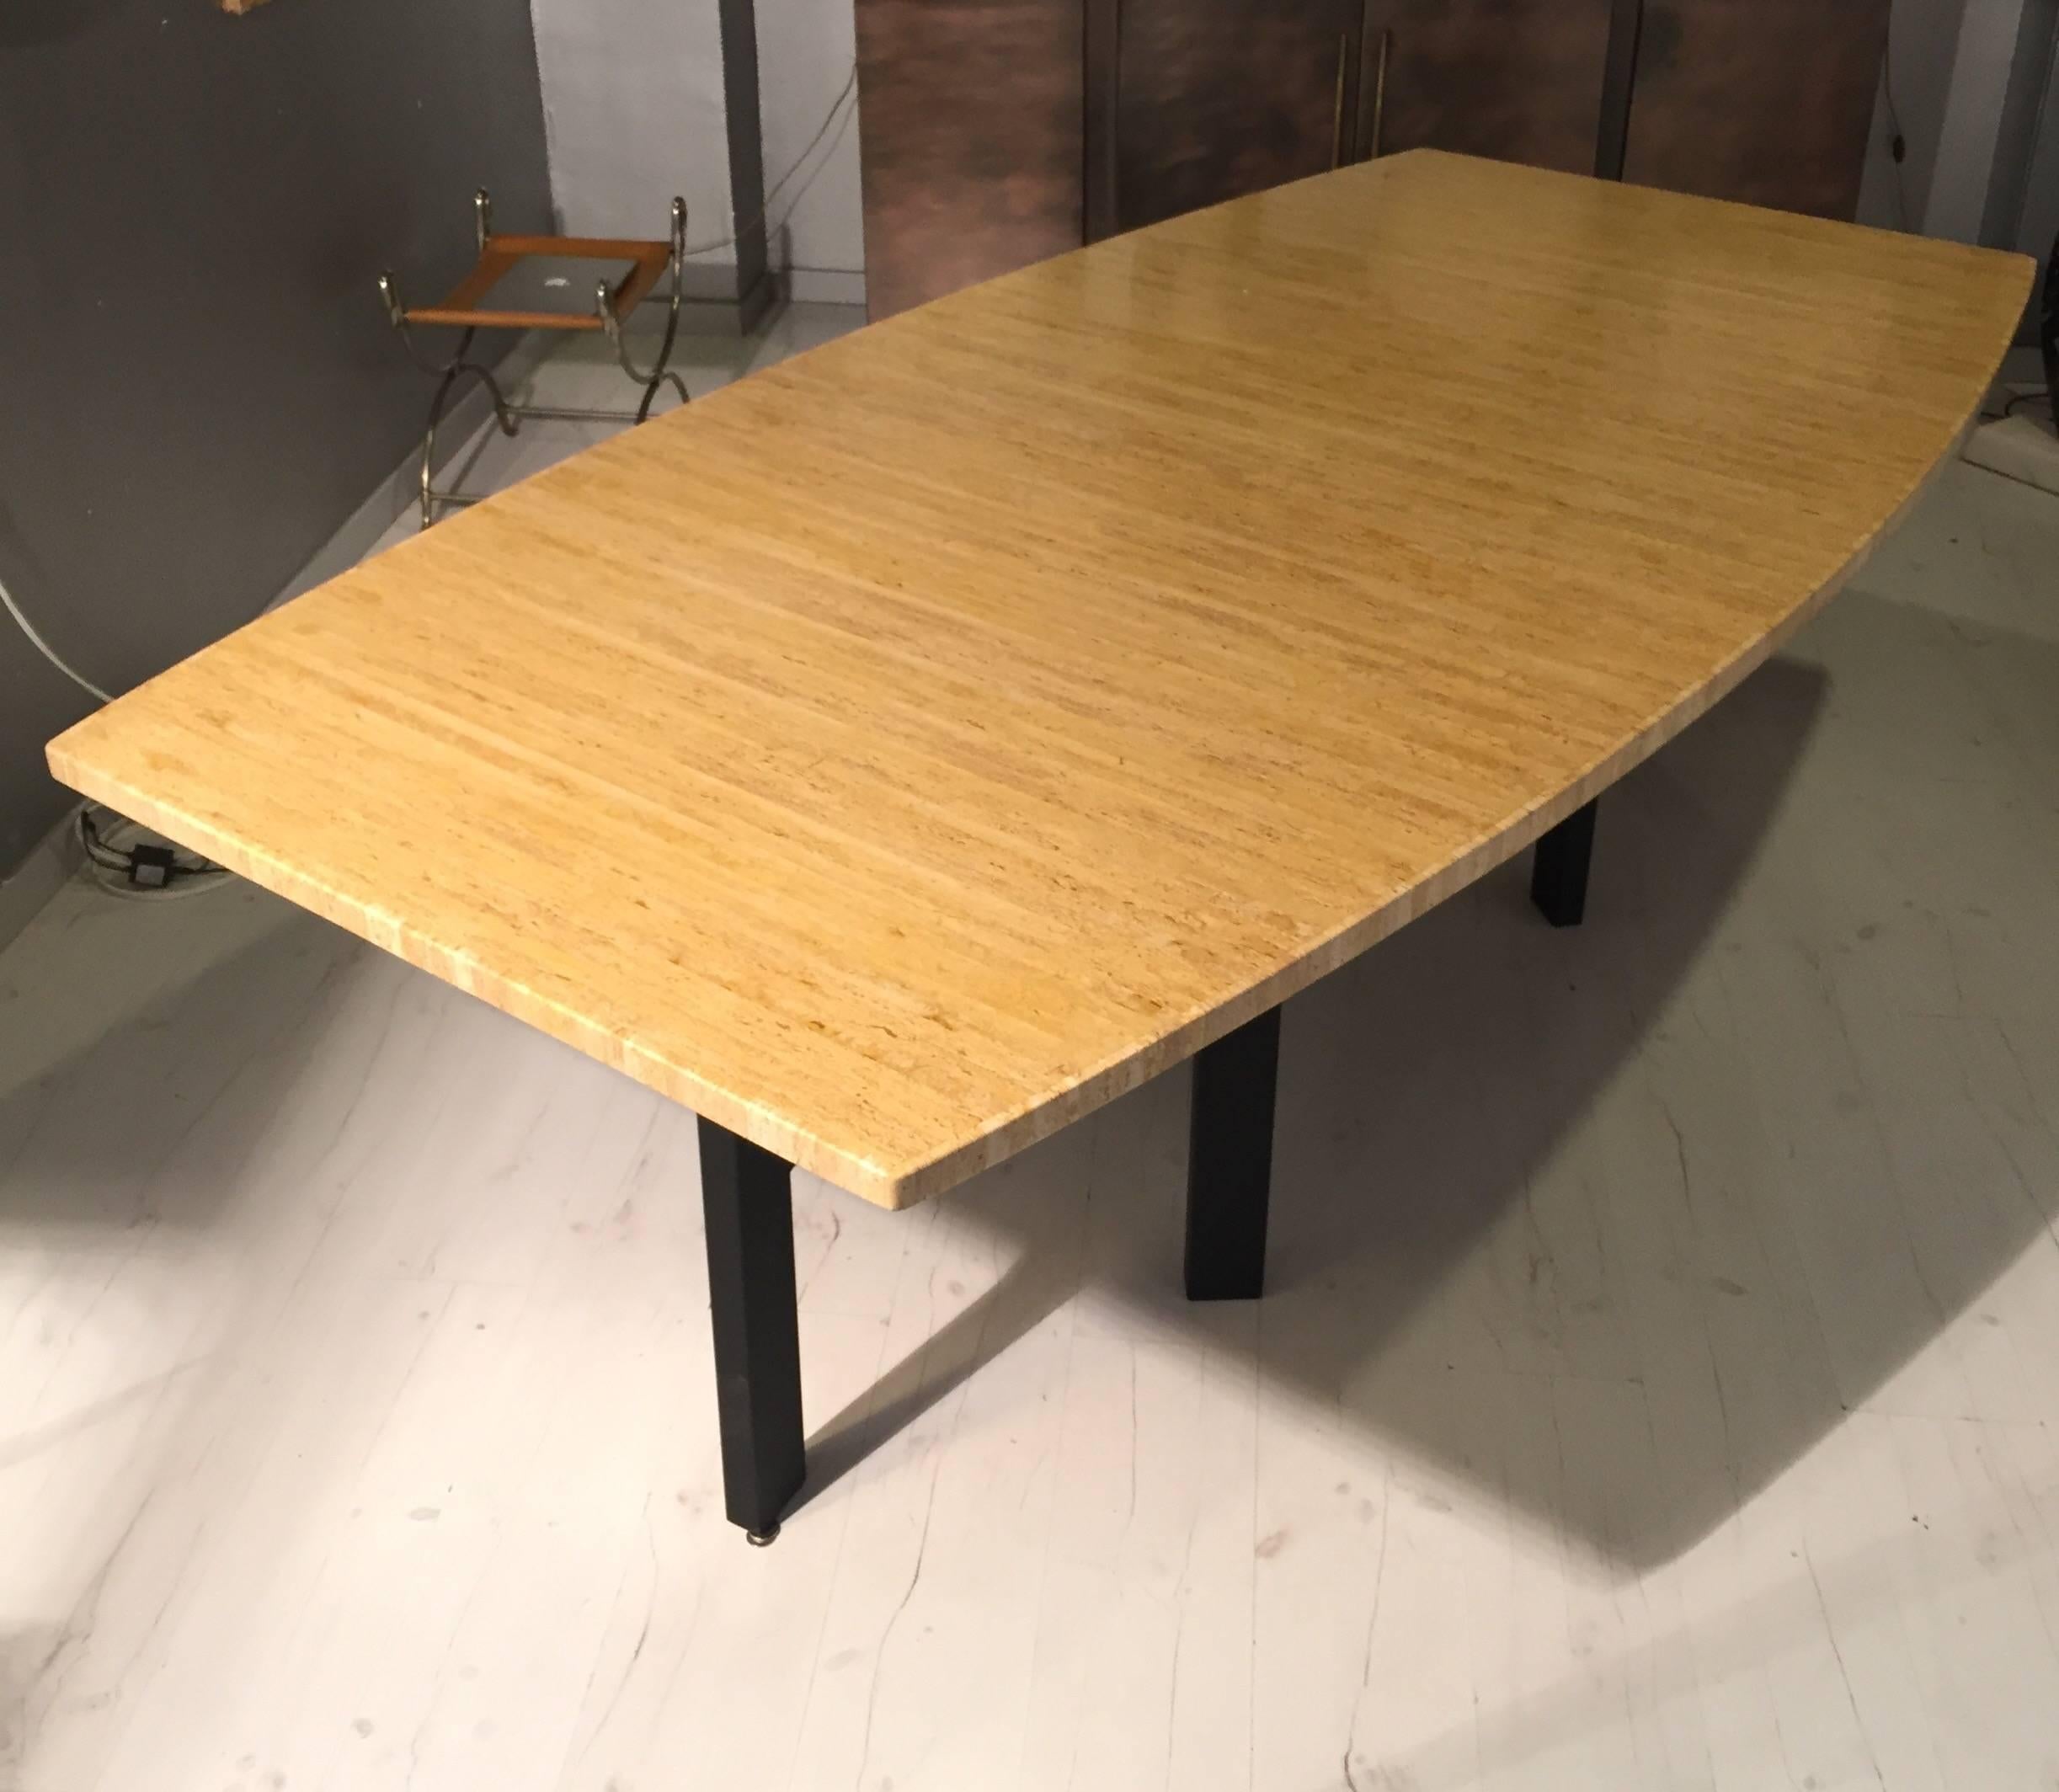 1980s dining table by Etienne Allemeersch, top is in travertine marble marquetry
black iron feet.